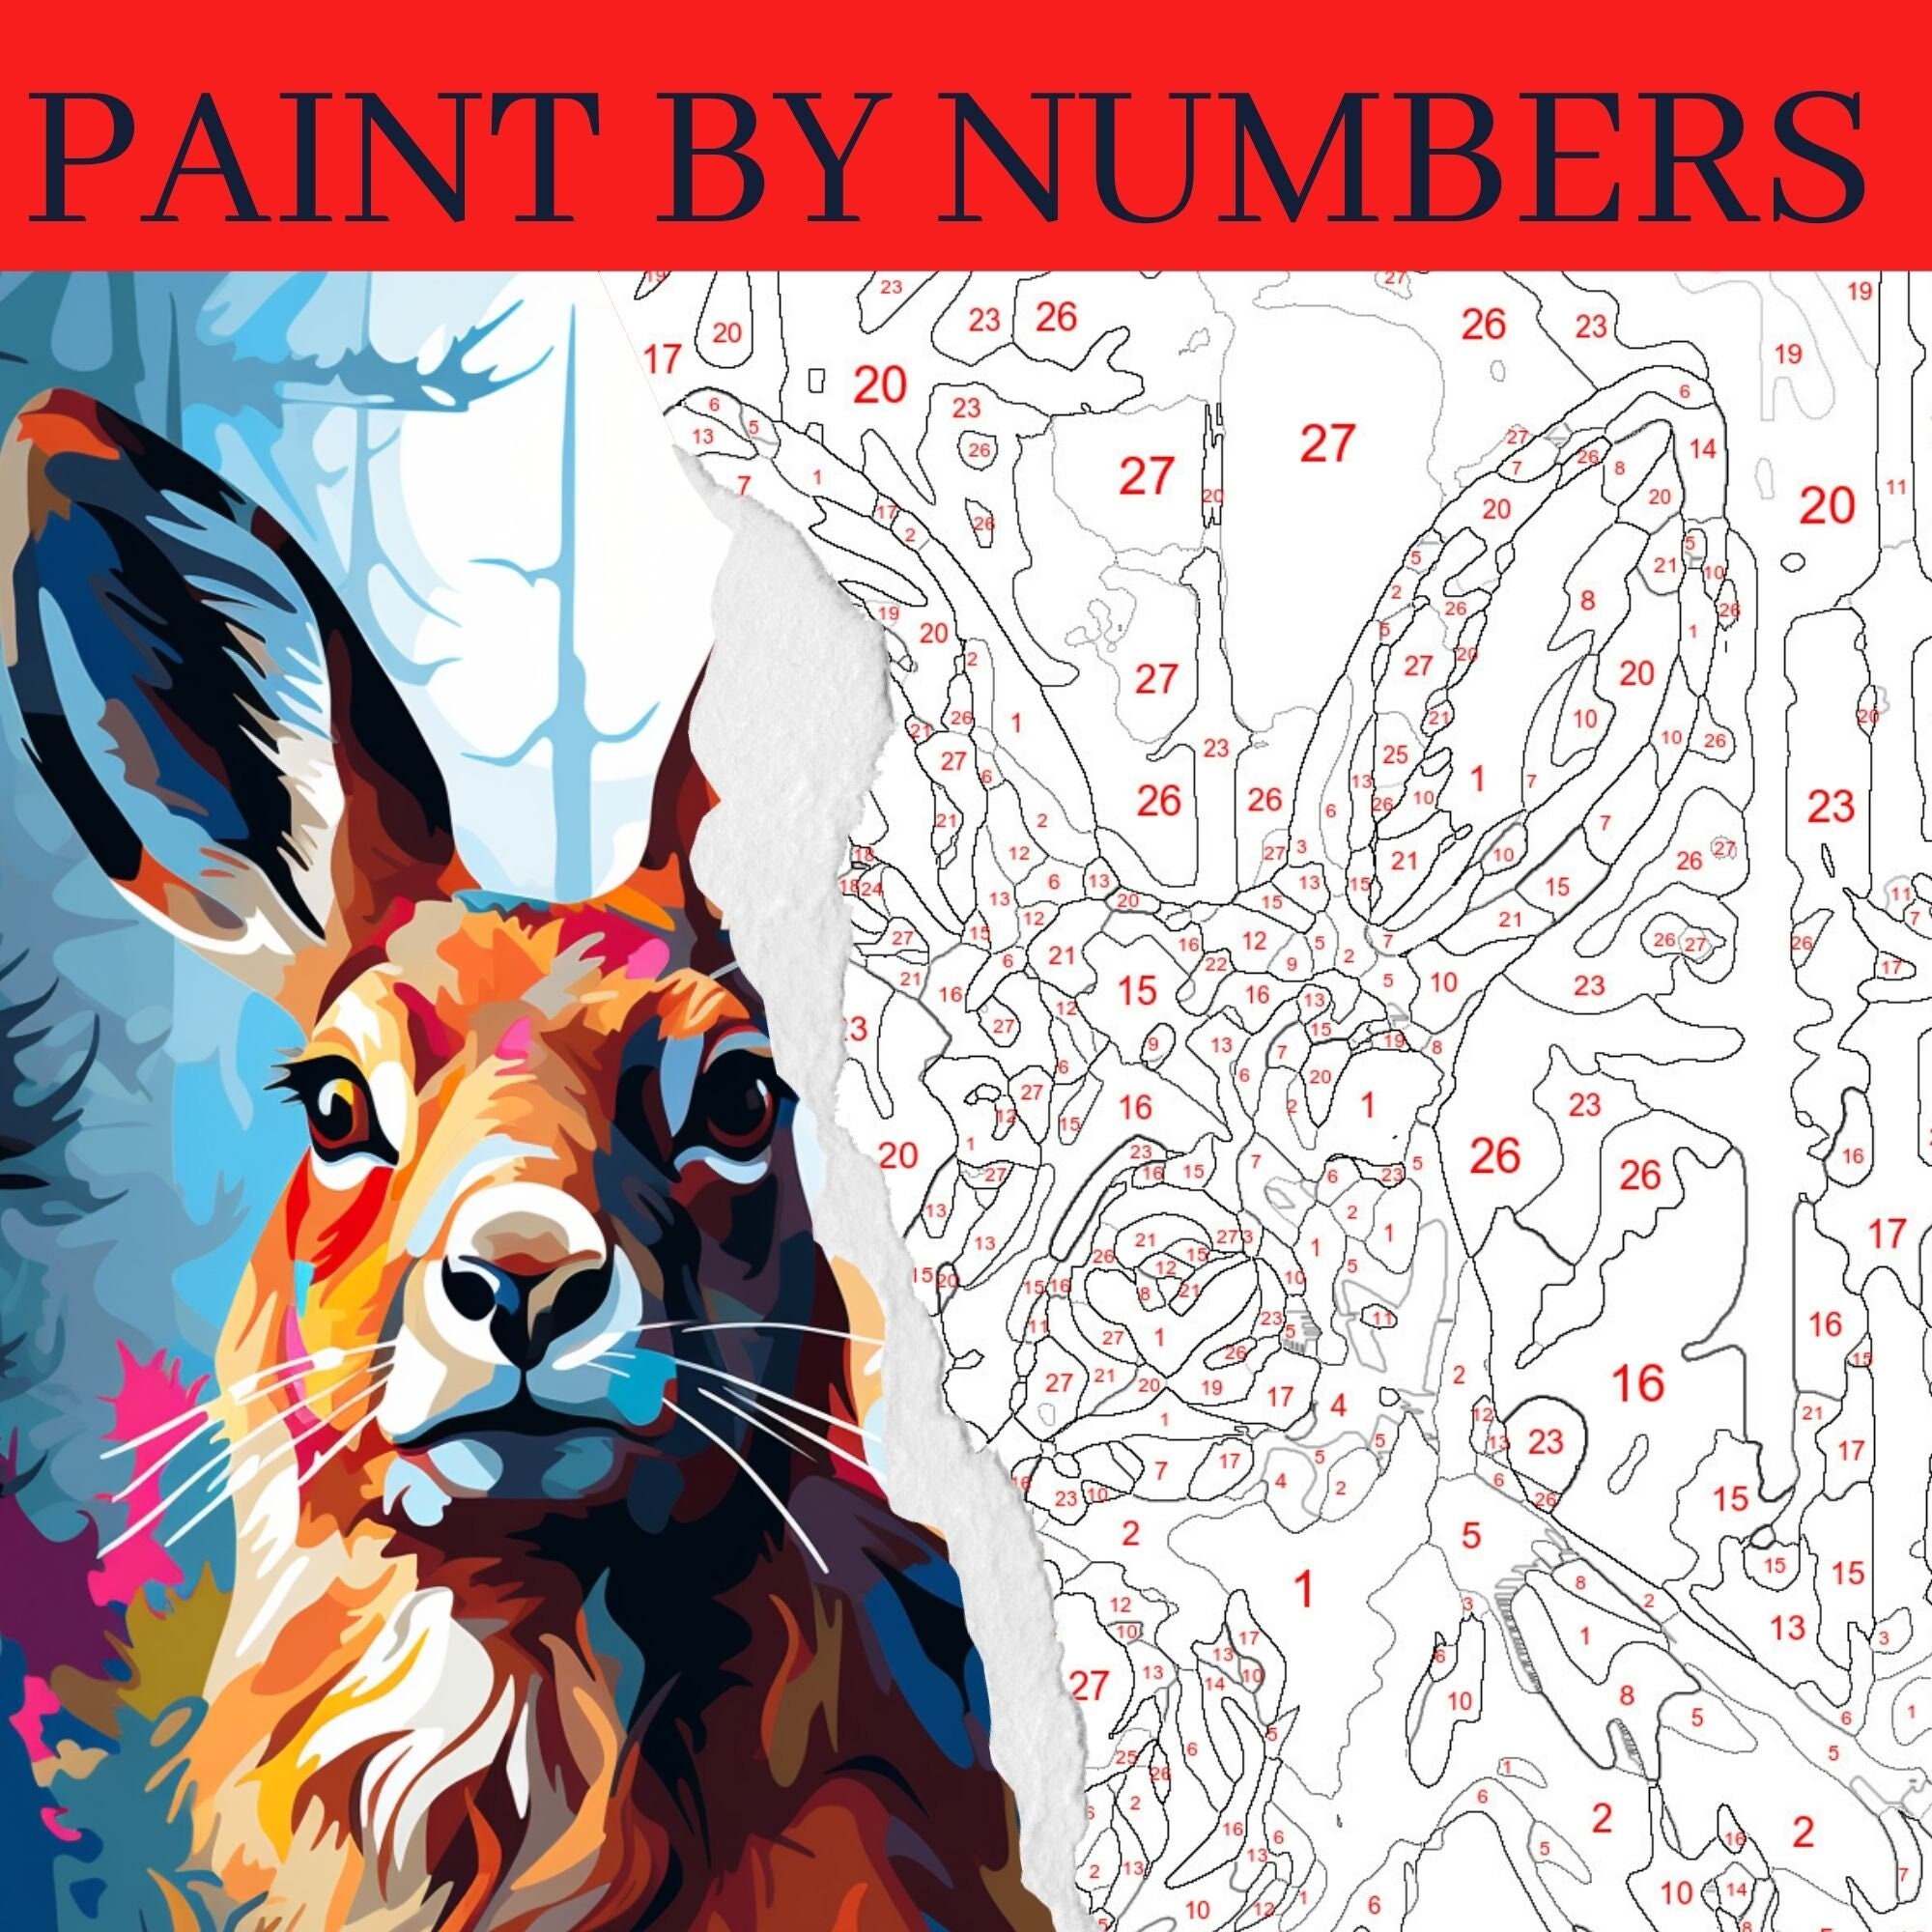 Ledg Paint by Numbers for Adults: Beginner to Advanced Number Painting Kit - Fun DIY Adult Arts and Crafts Projects - Kits I